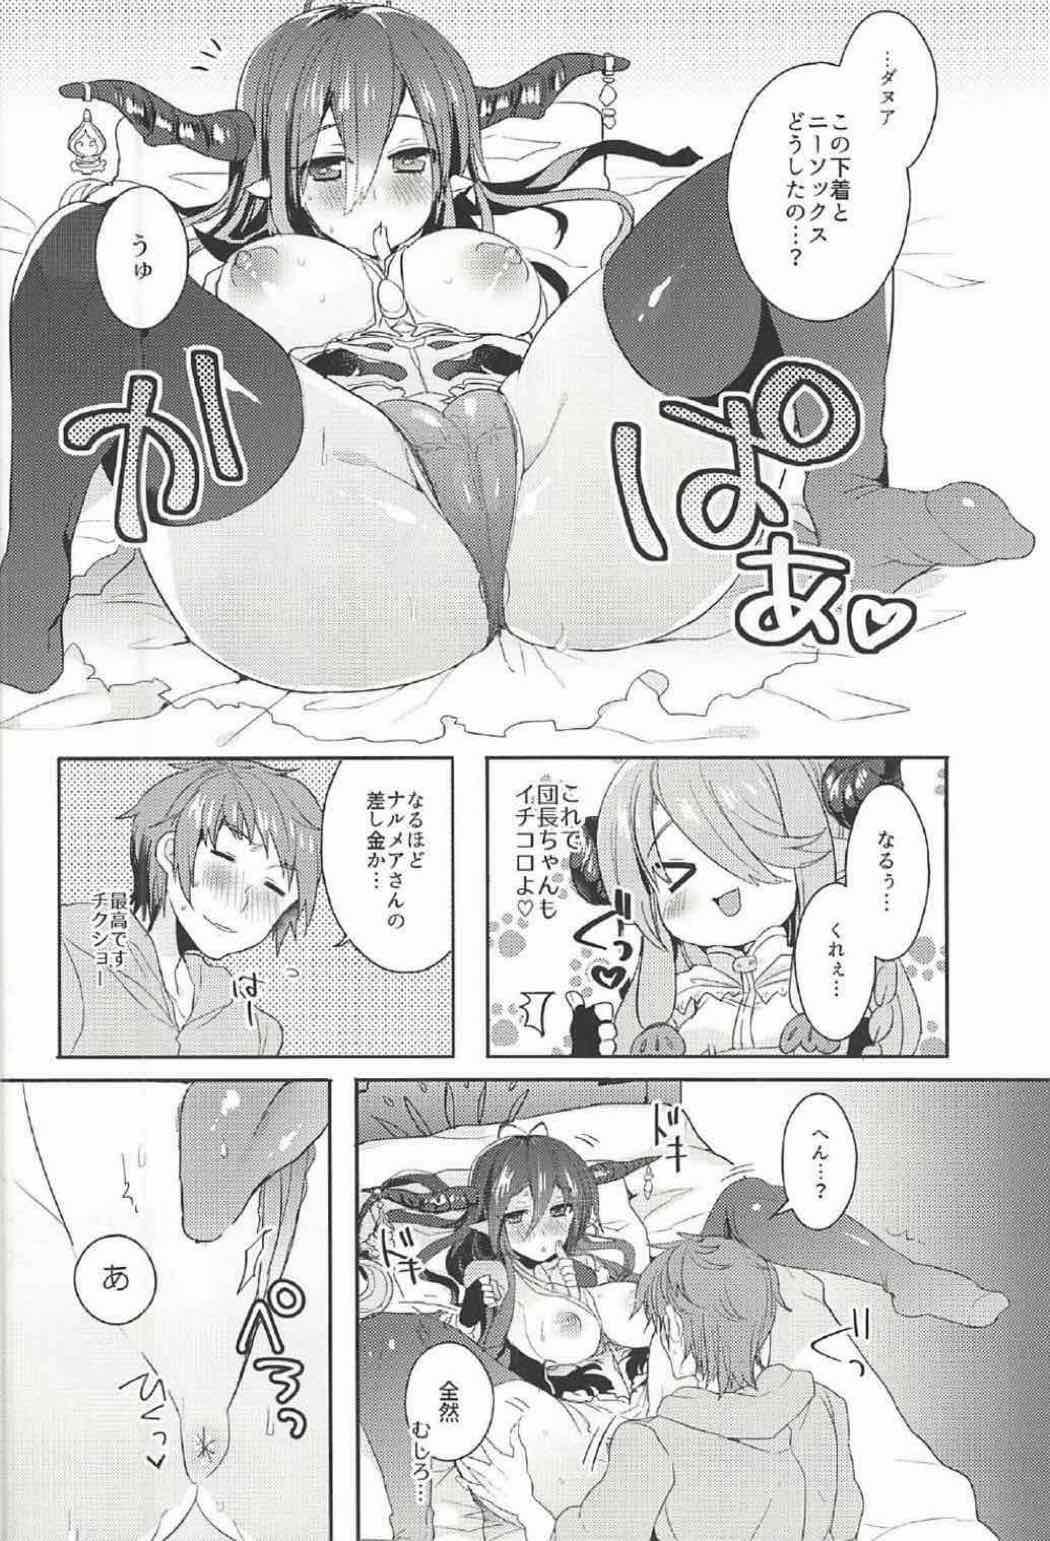 Small Tits GIVE ME! - Granblue fantasy Pussysex - Page 7